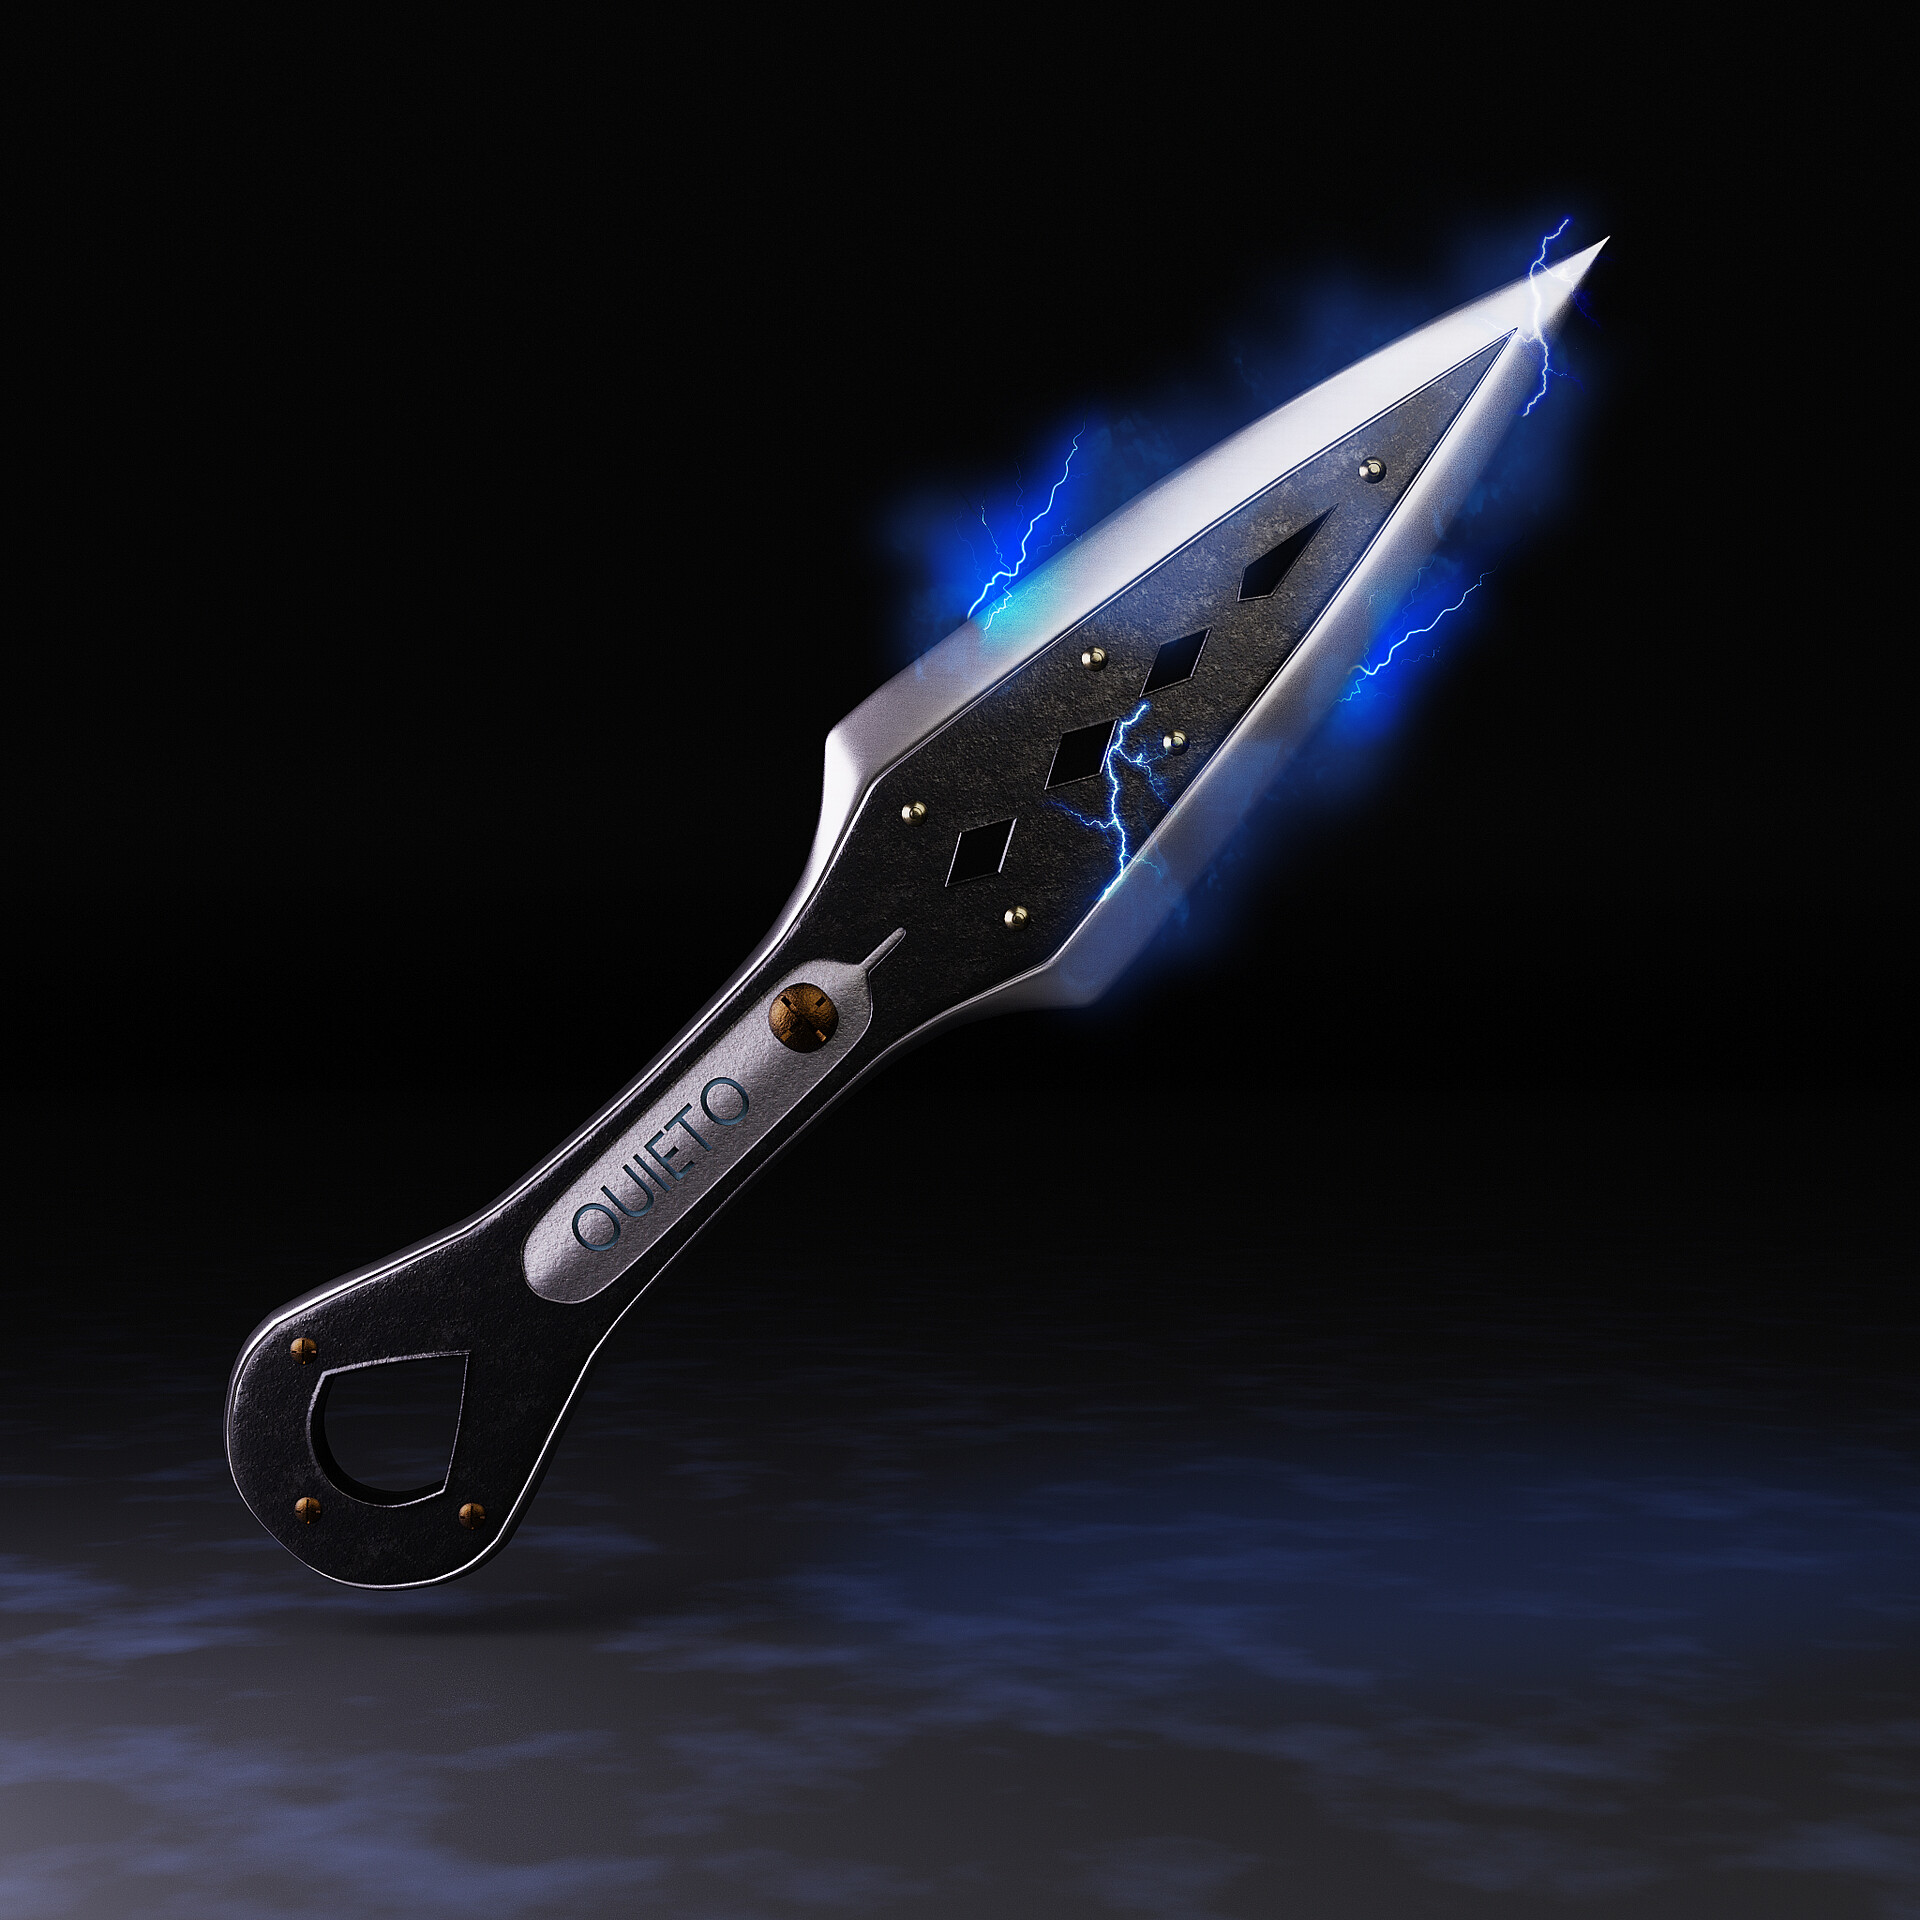 This the Kunai (Heirloom) of the Wraith Legend from Apex Legends game. 